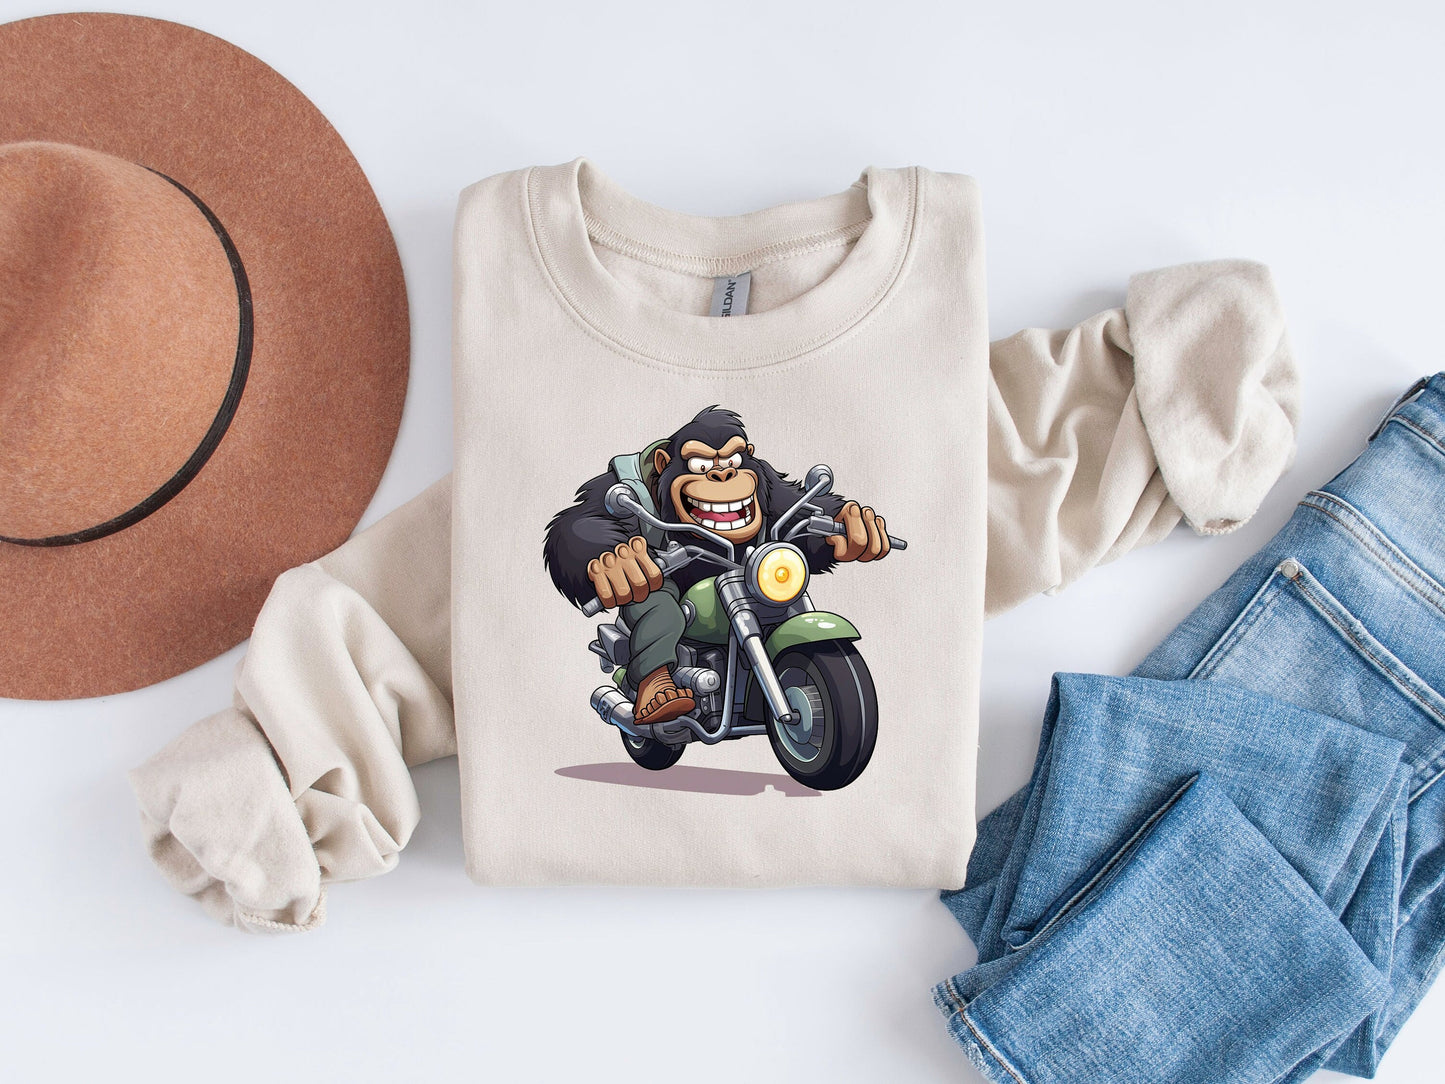 Born to Ride: Gorilla Biker Sublimation Design for Motorcycle Enthusiasts